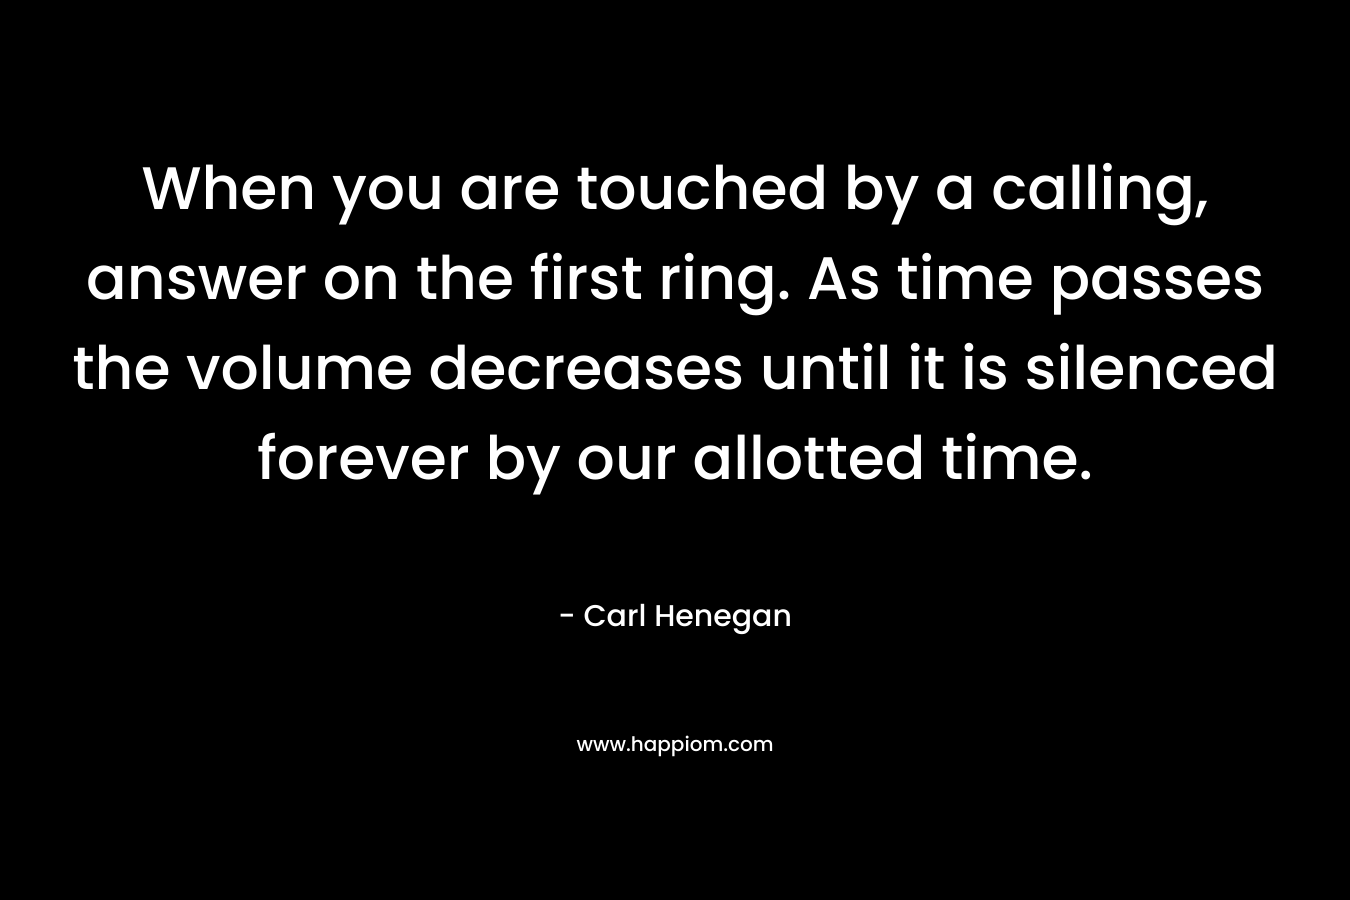 When you are touched by a calling, answer on the first ring. As time passes the volume decreases until it is silenced forever by our allotted time.